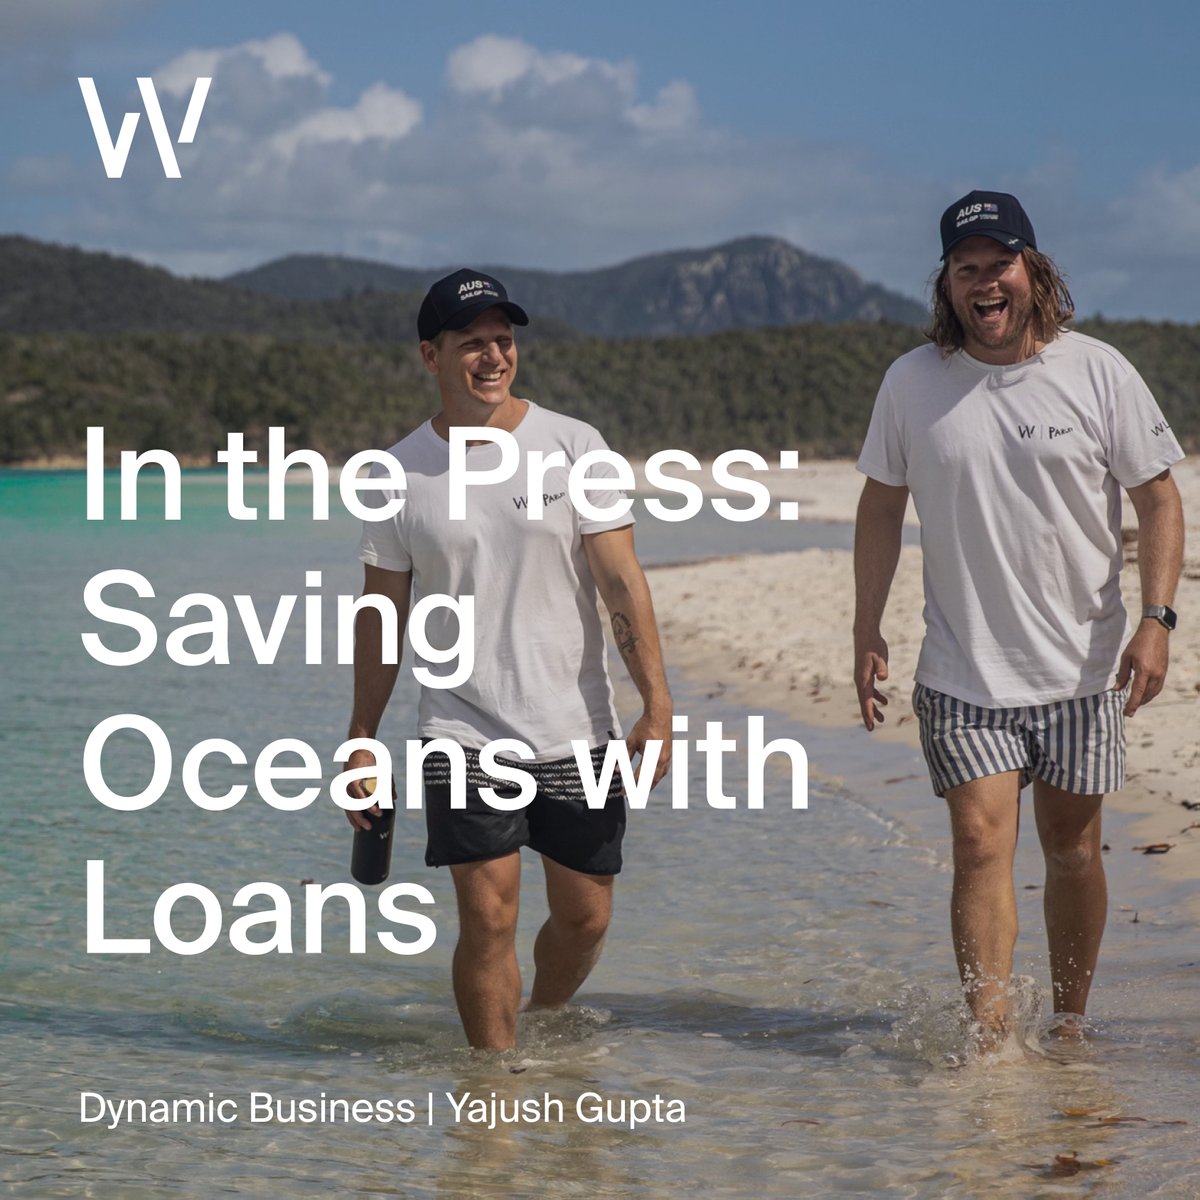 Ever wondered how the WLTH story began? Catch a glimpse behind its inception and how the vision came into fruition. Head to our press page for more information.

#loansfortheoceans #impact #digitallender